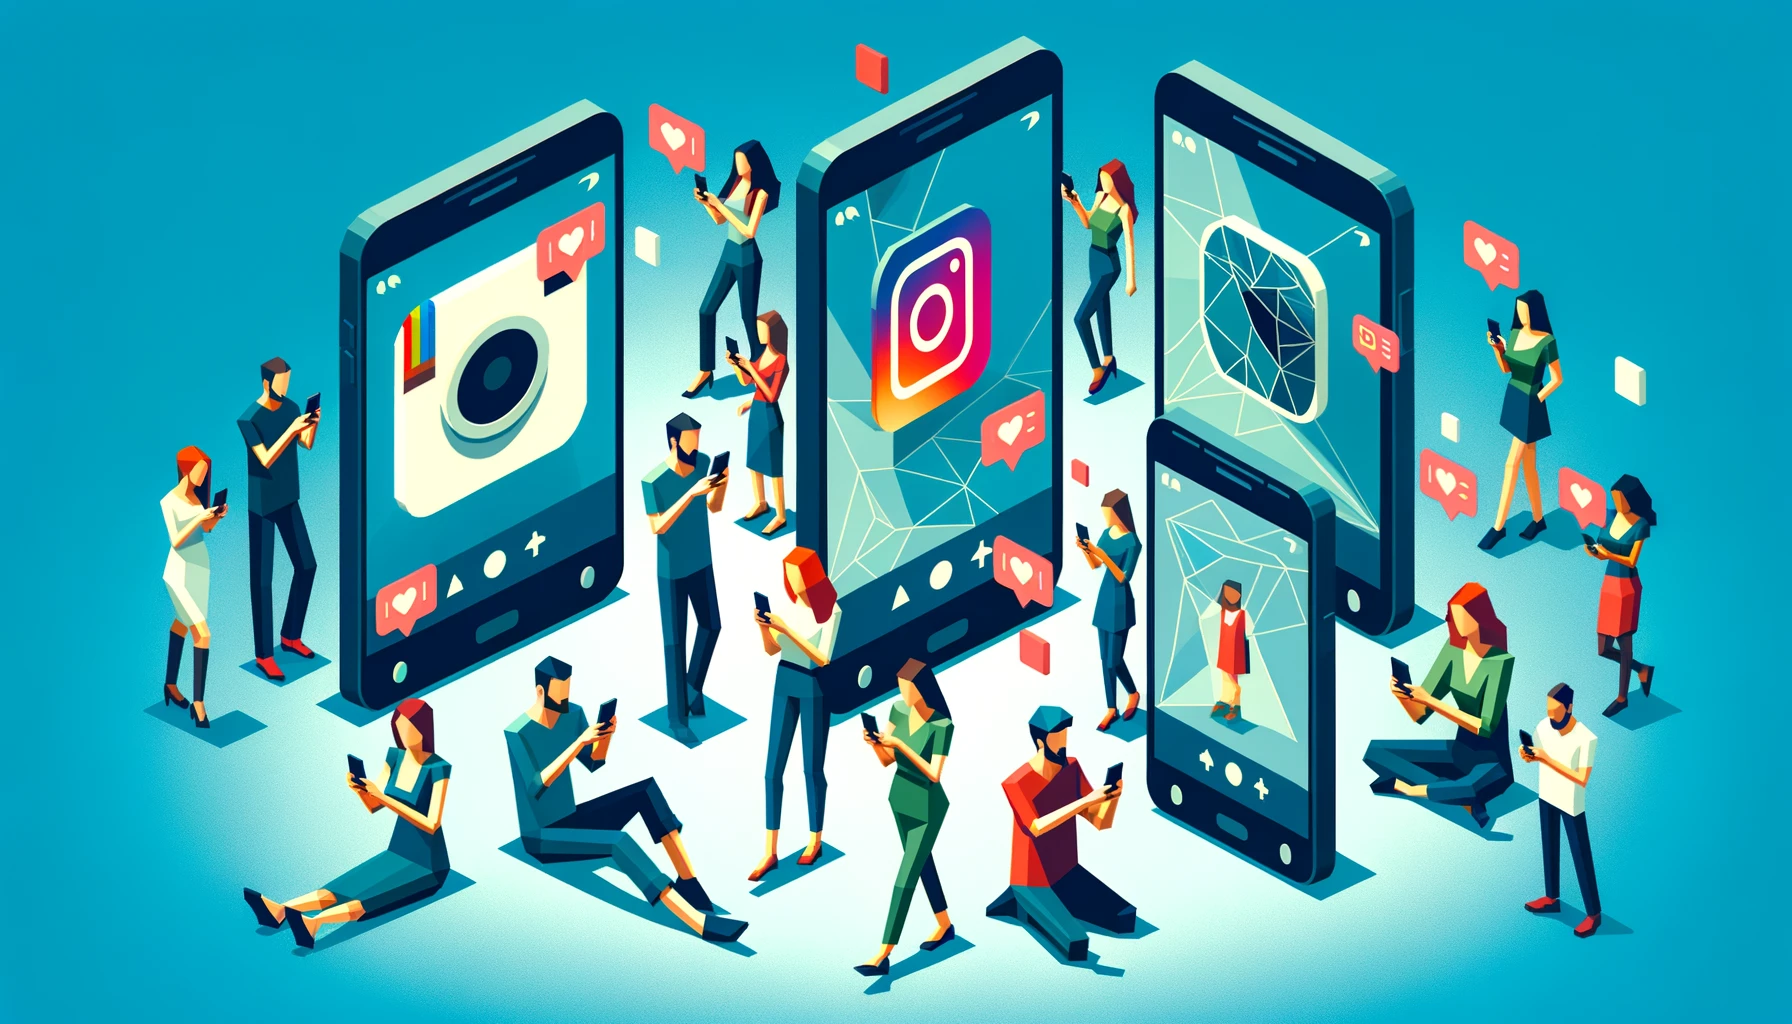 DALL·E 2024 01 08 22.37.32 Several People Using Instagram On Their Smartphones Depicted In A Low Poly Art Style. The Background Is Light Blue And The Image Is In A 16 9 Format 